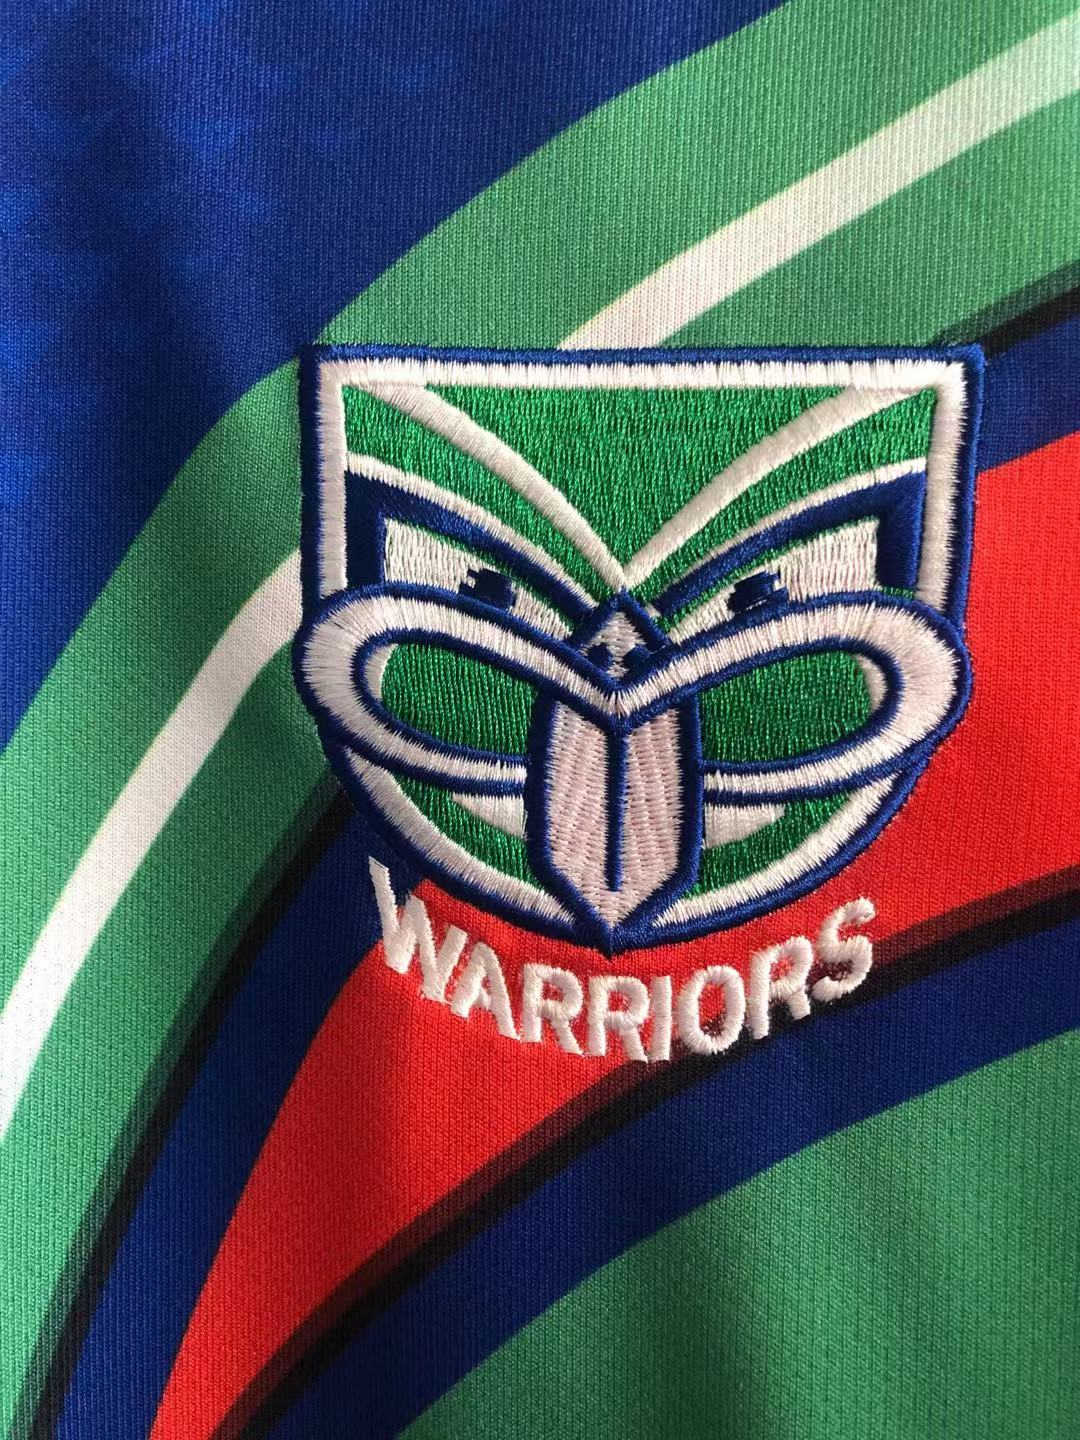 2021 New Zealand Warriors Home Rugby Soccer Jersey Replica  Mens